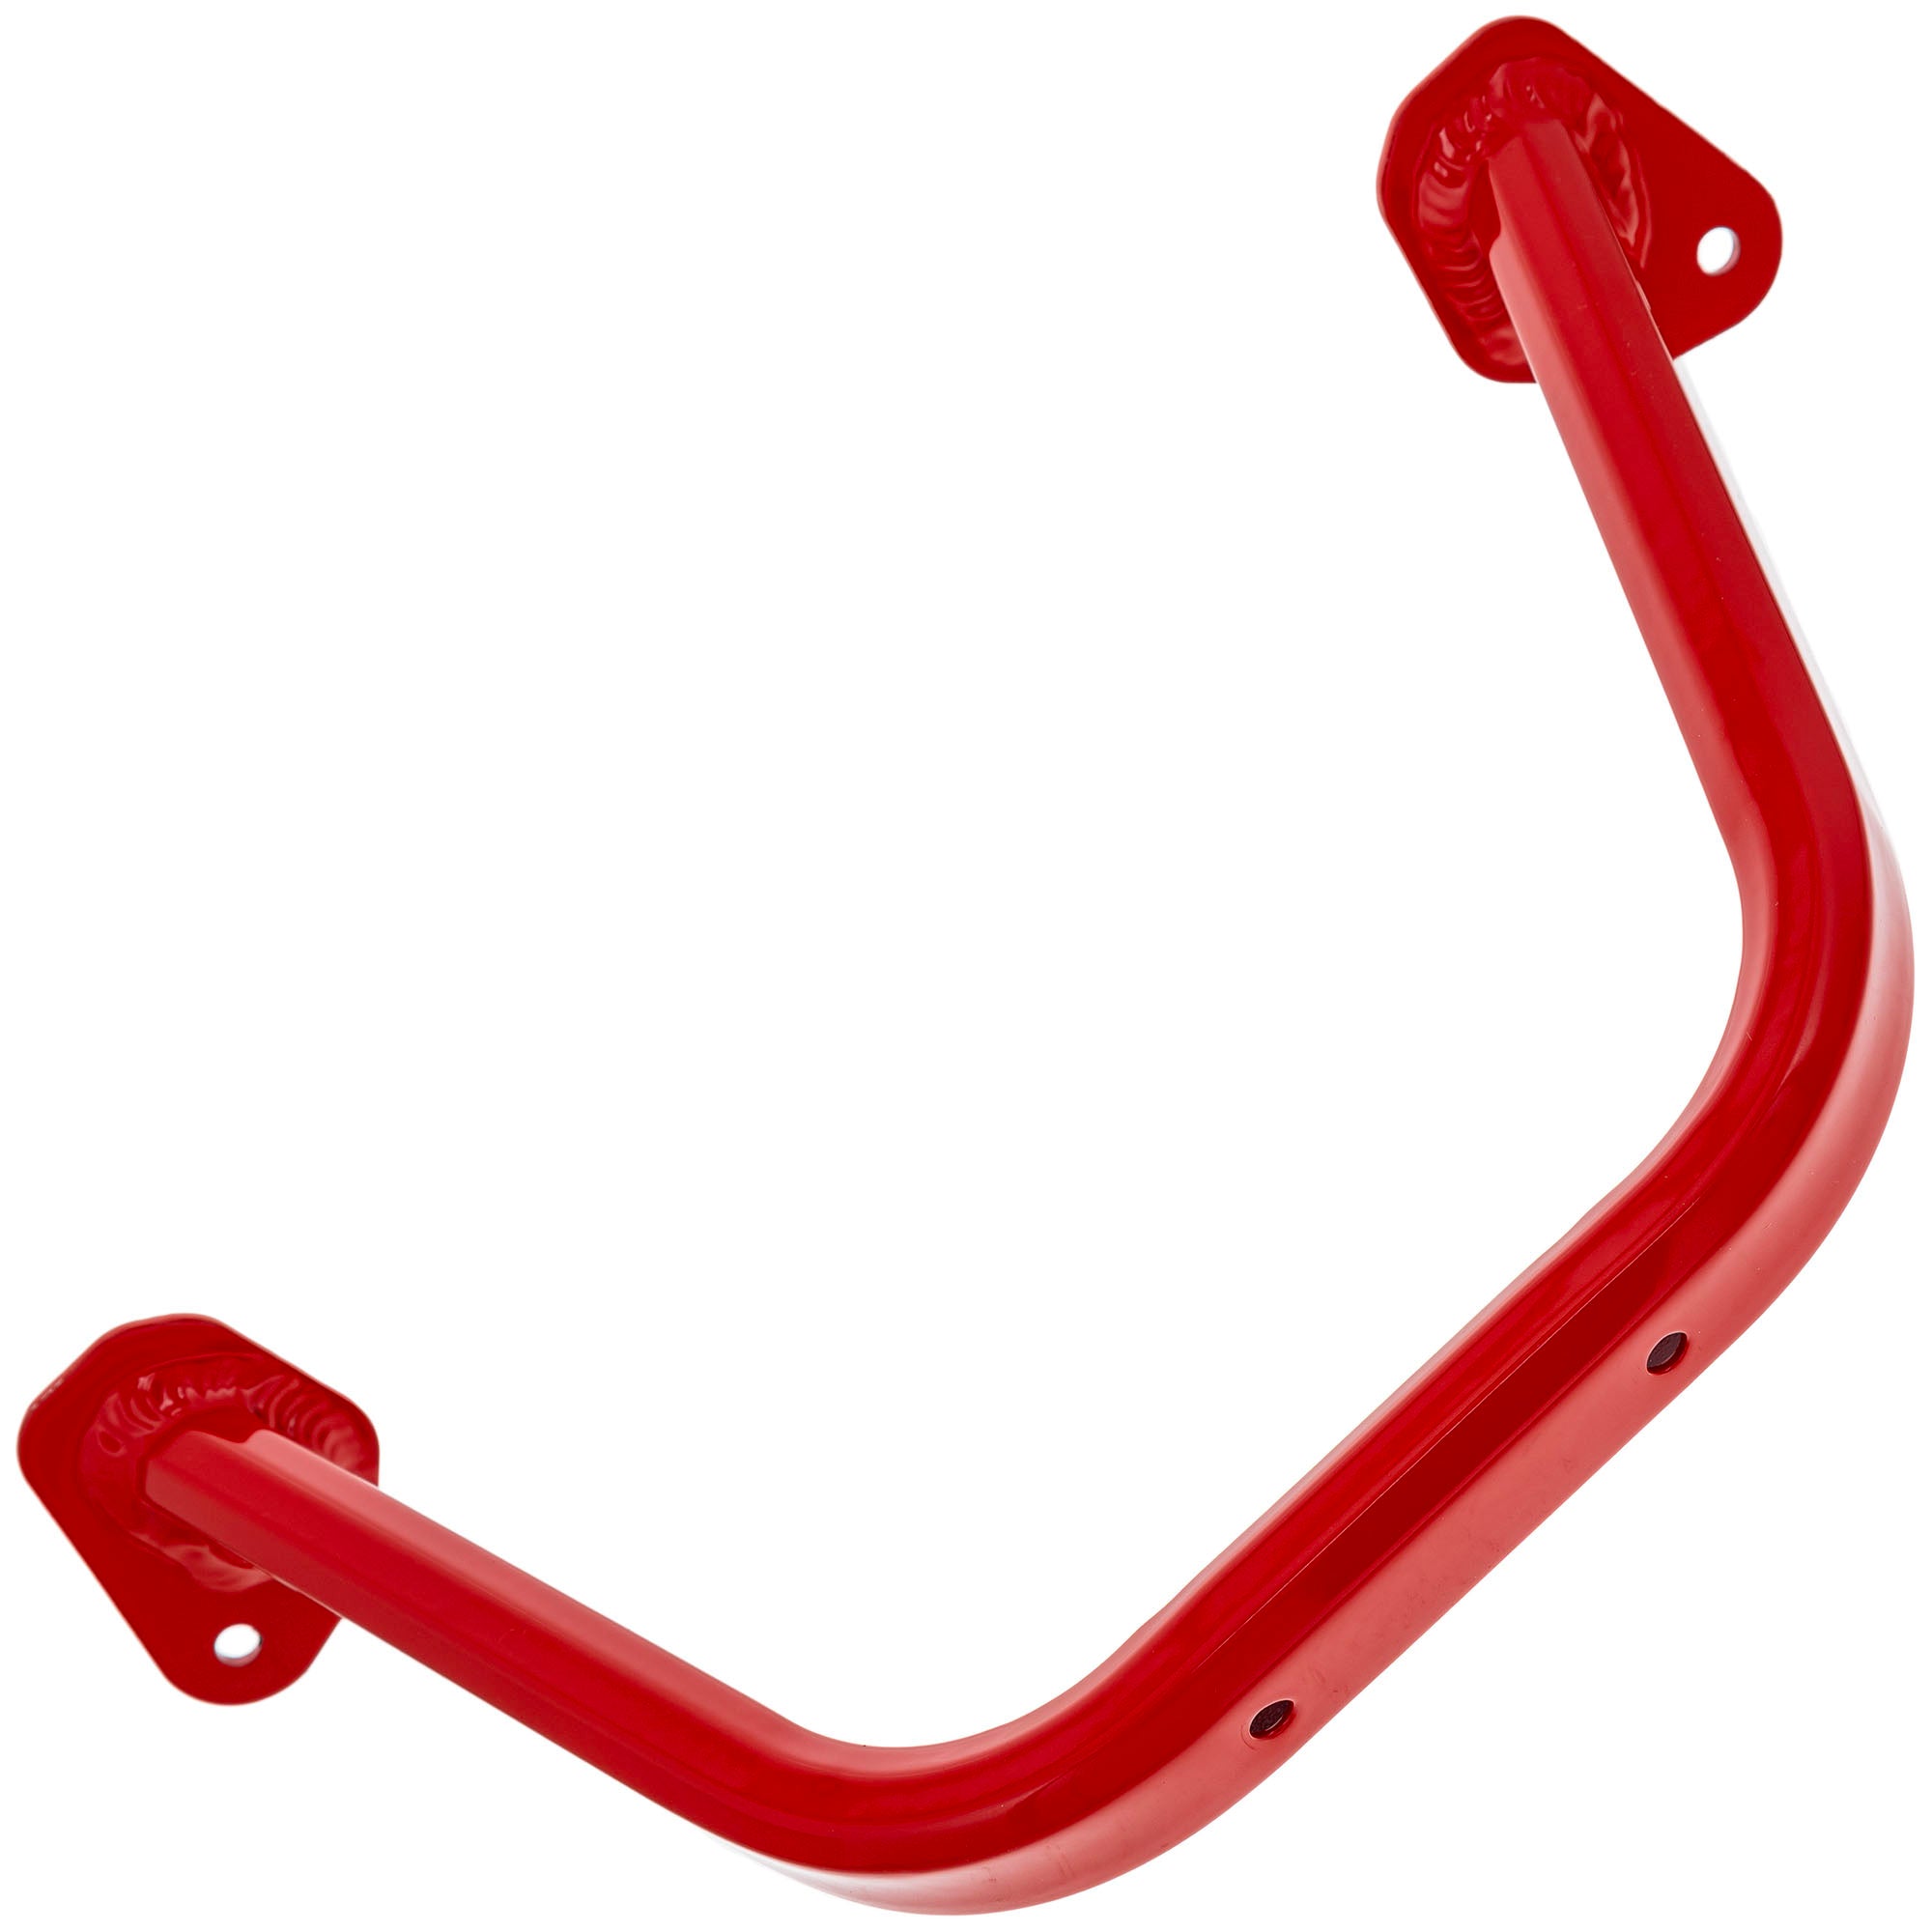 Polaris 1018789-293 Indy Red Seat Support 2015 PRO RMK Assault